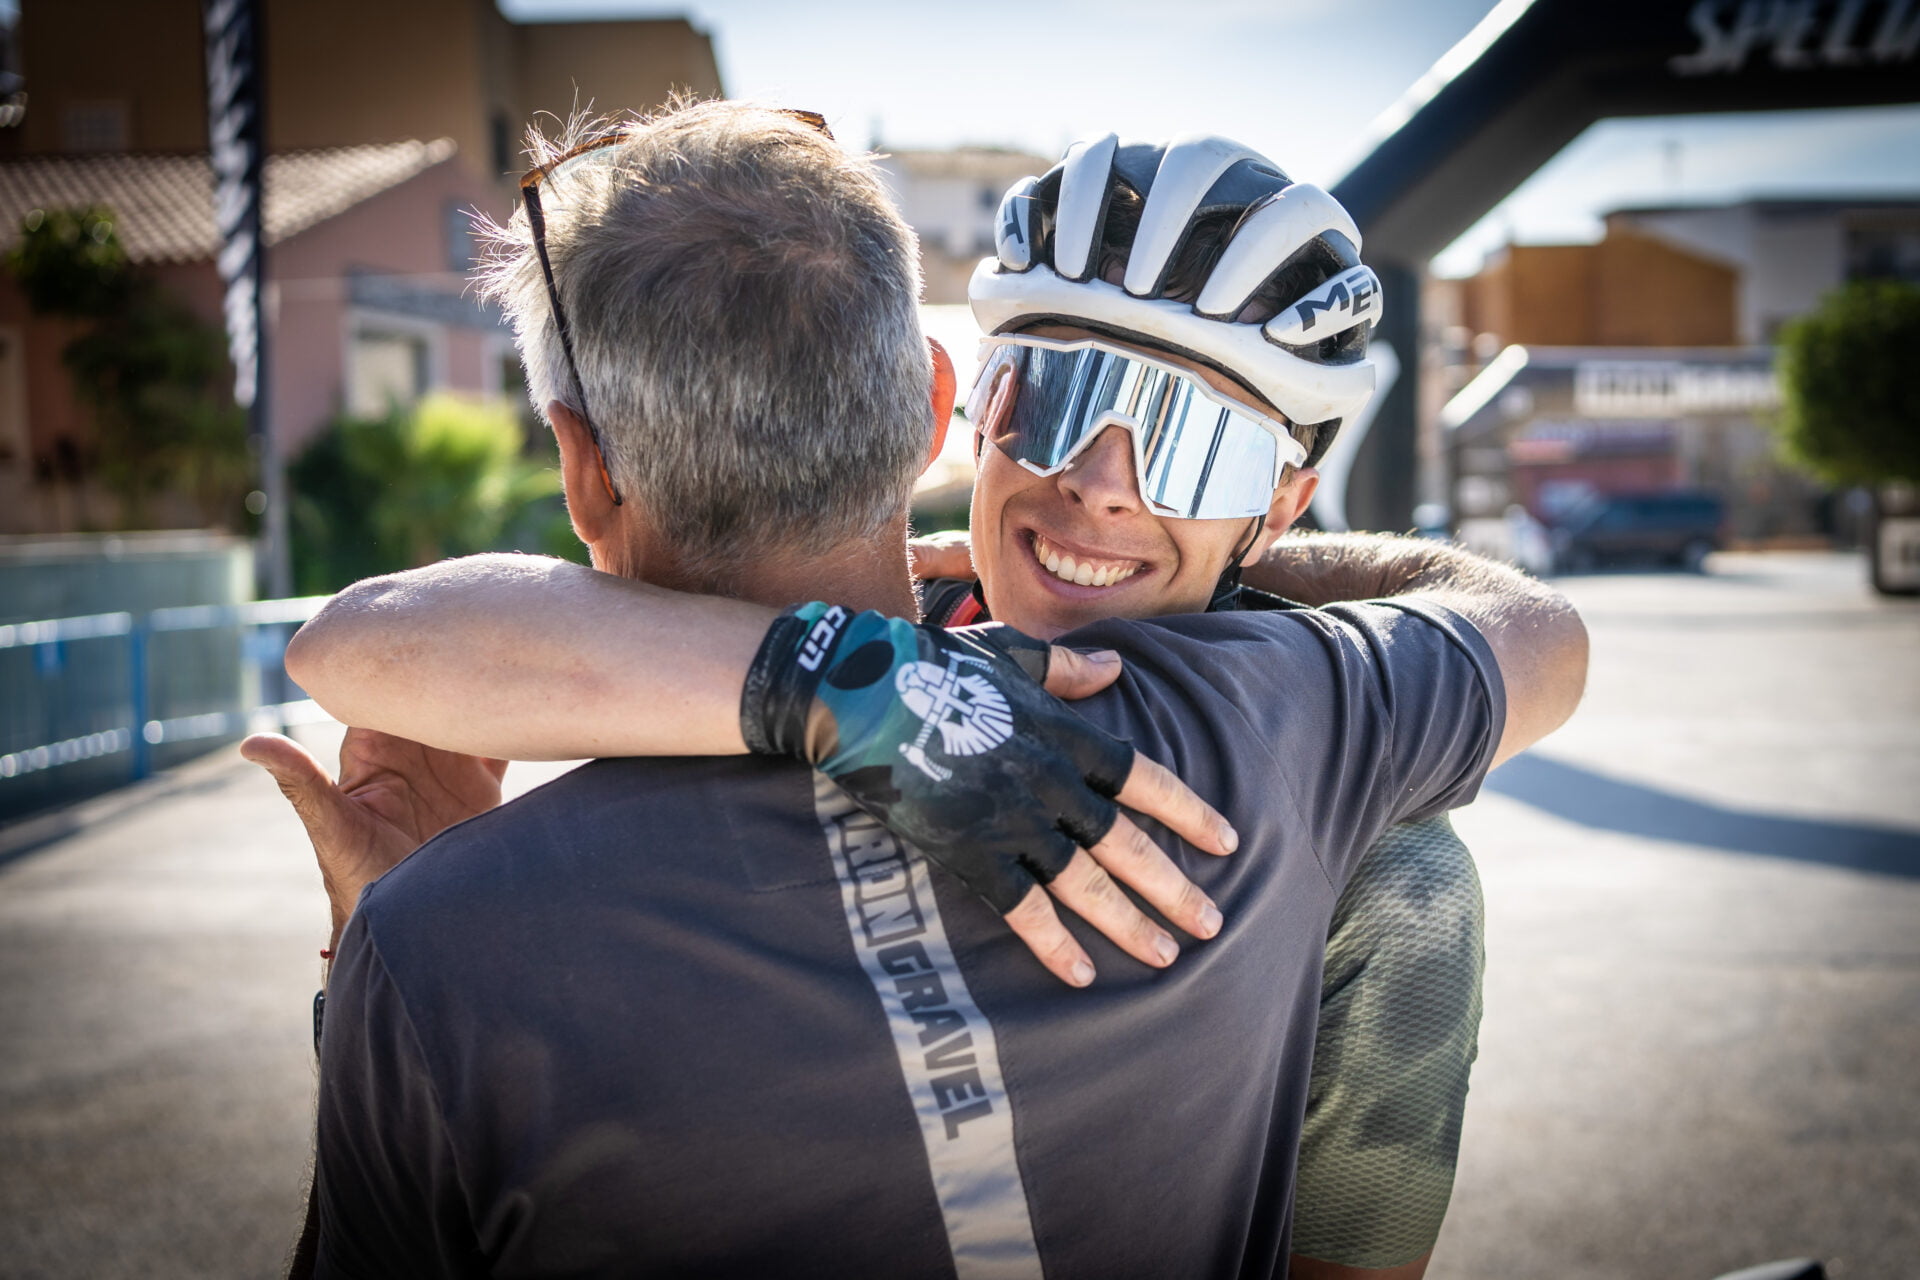 Hugging after the finish of Iron gravel